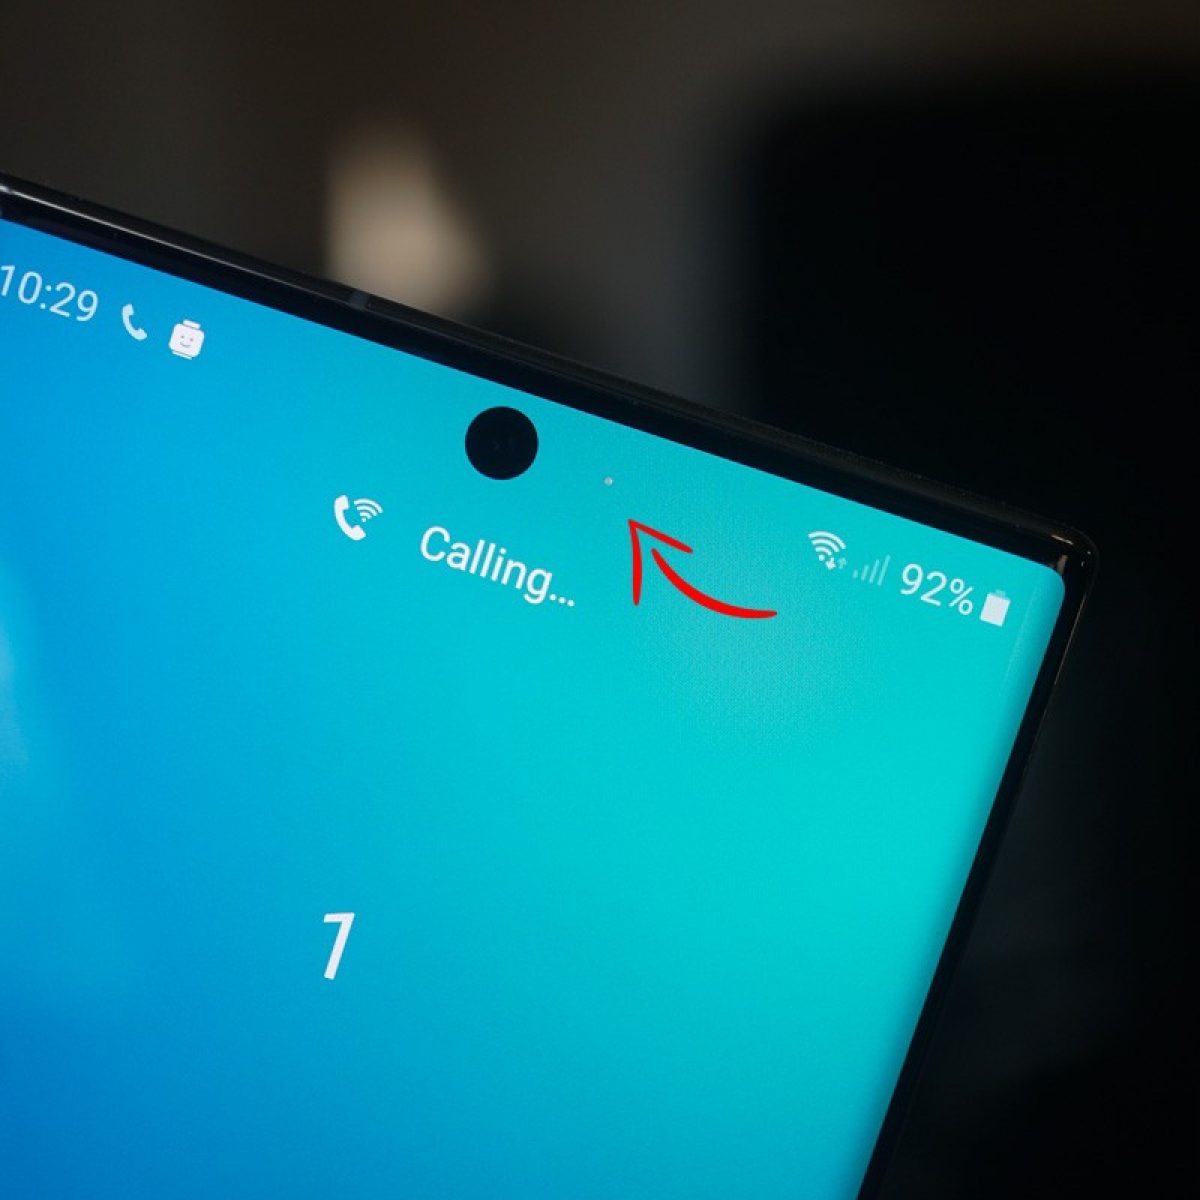 Psa Your Galaxy Note 10 Doesn T Have A Dead Pixel That S The Proximity Sensor